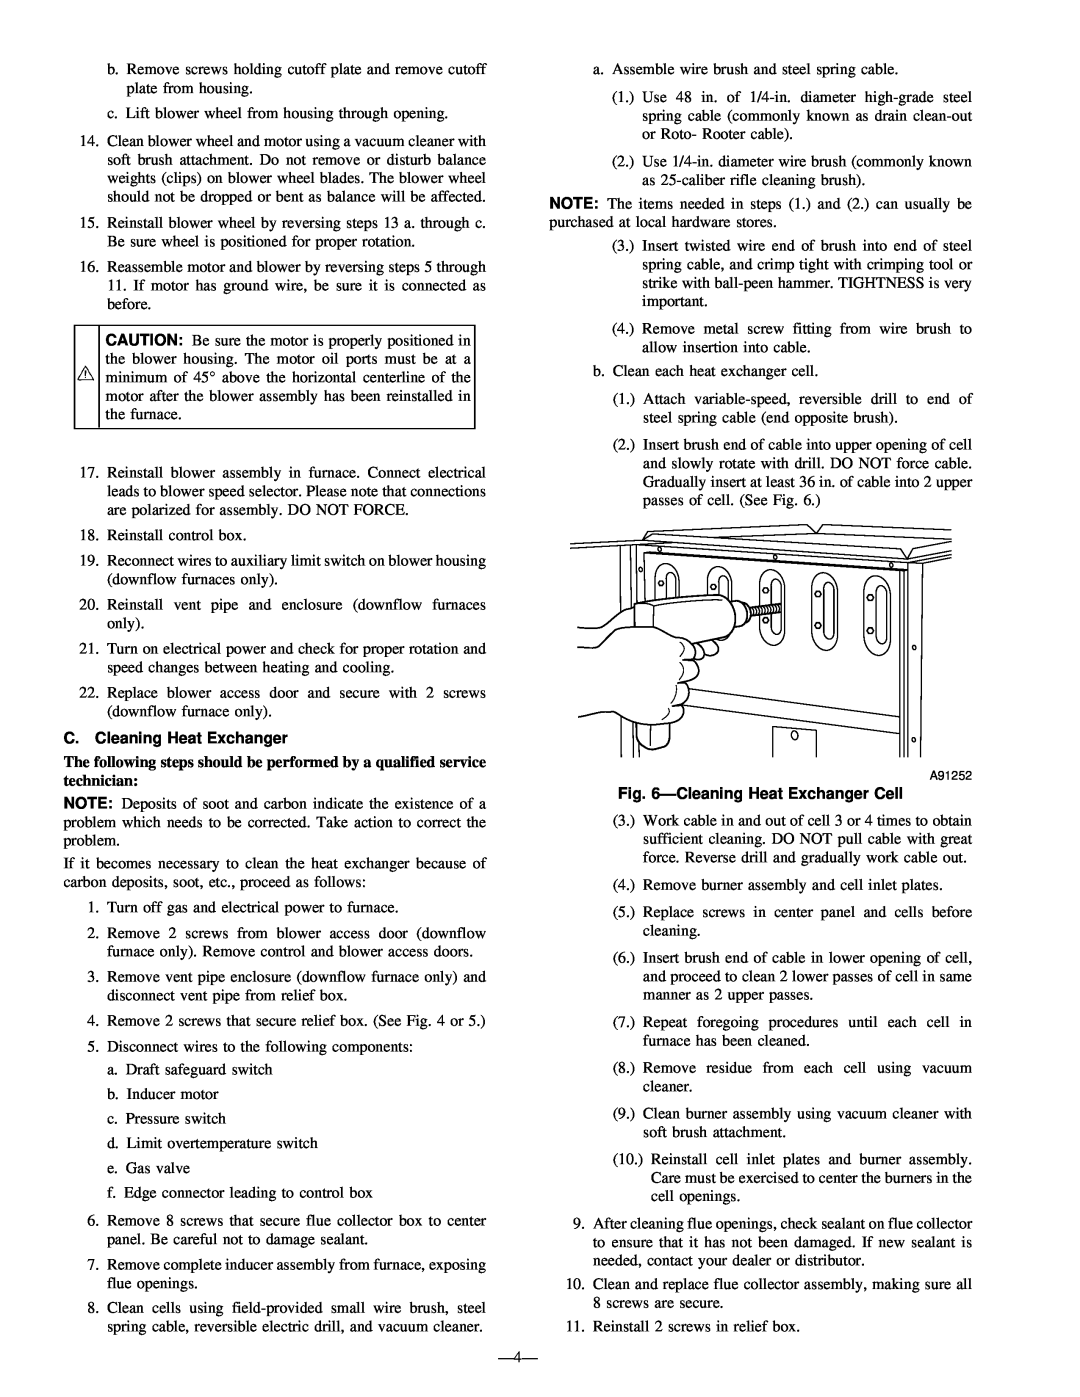 Bryant 394HAD, 396HAD instruction manual C.Cleaning Heat Exchanger, ÐCleaning Heat Exchanger Cell 